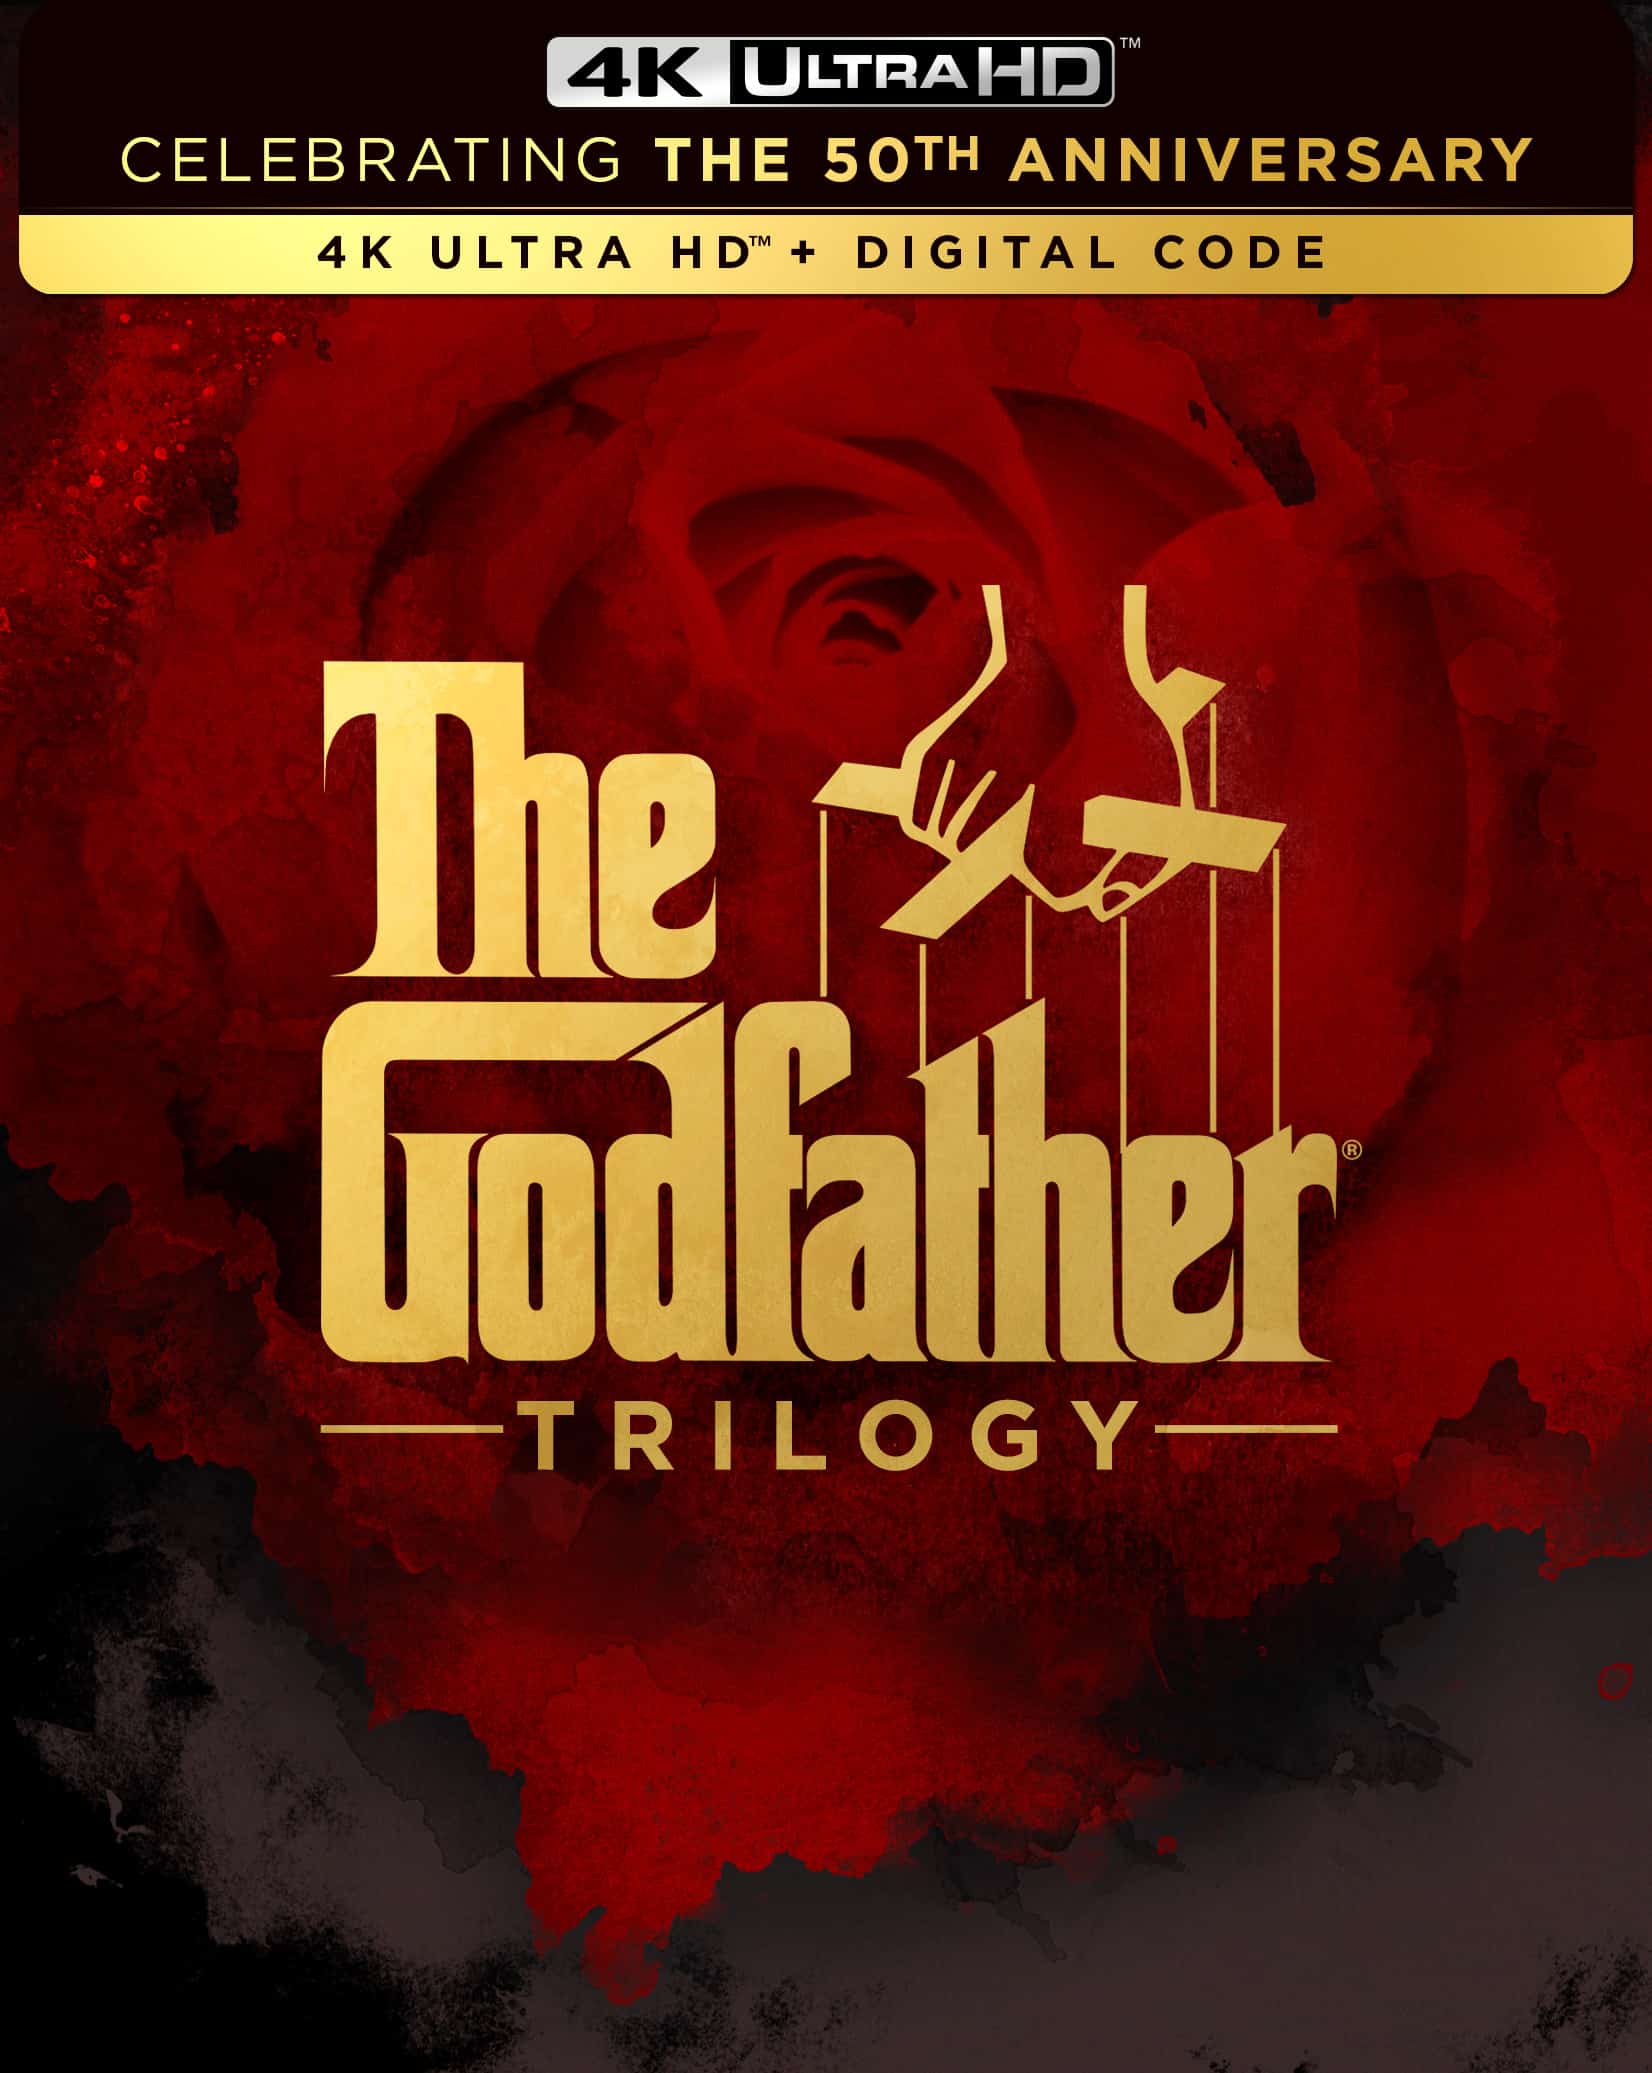 The Godfather turns 50 with a trip back to theaters and a 4K UHD debut 18